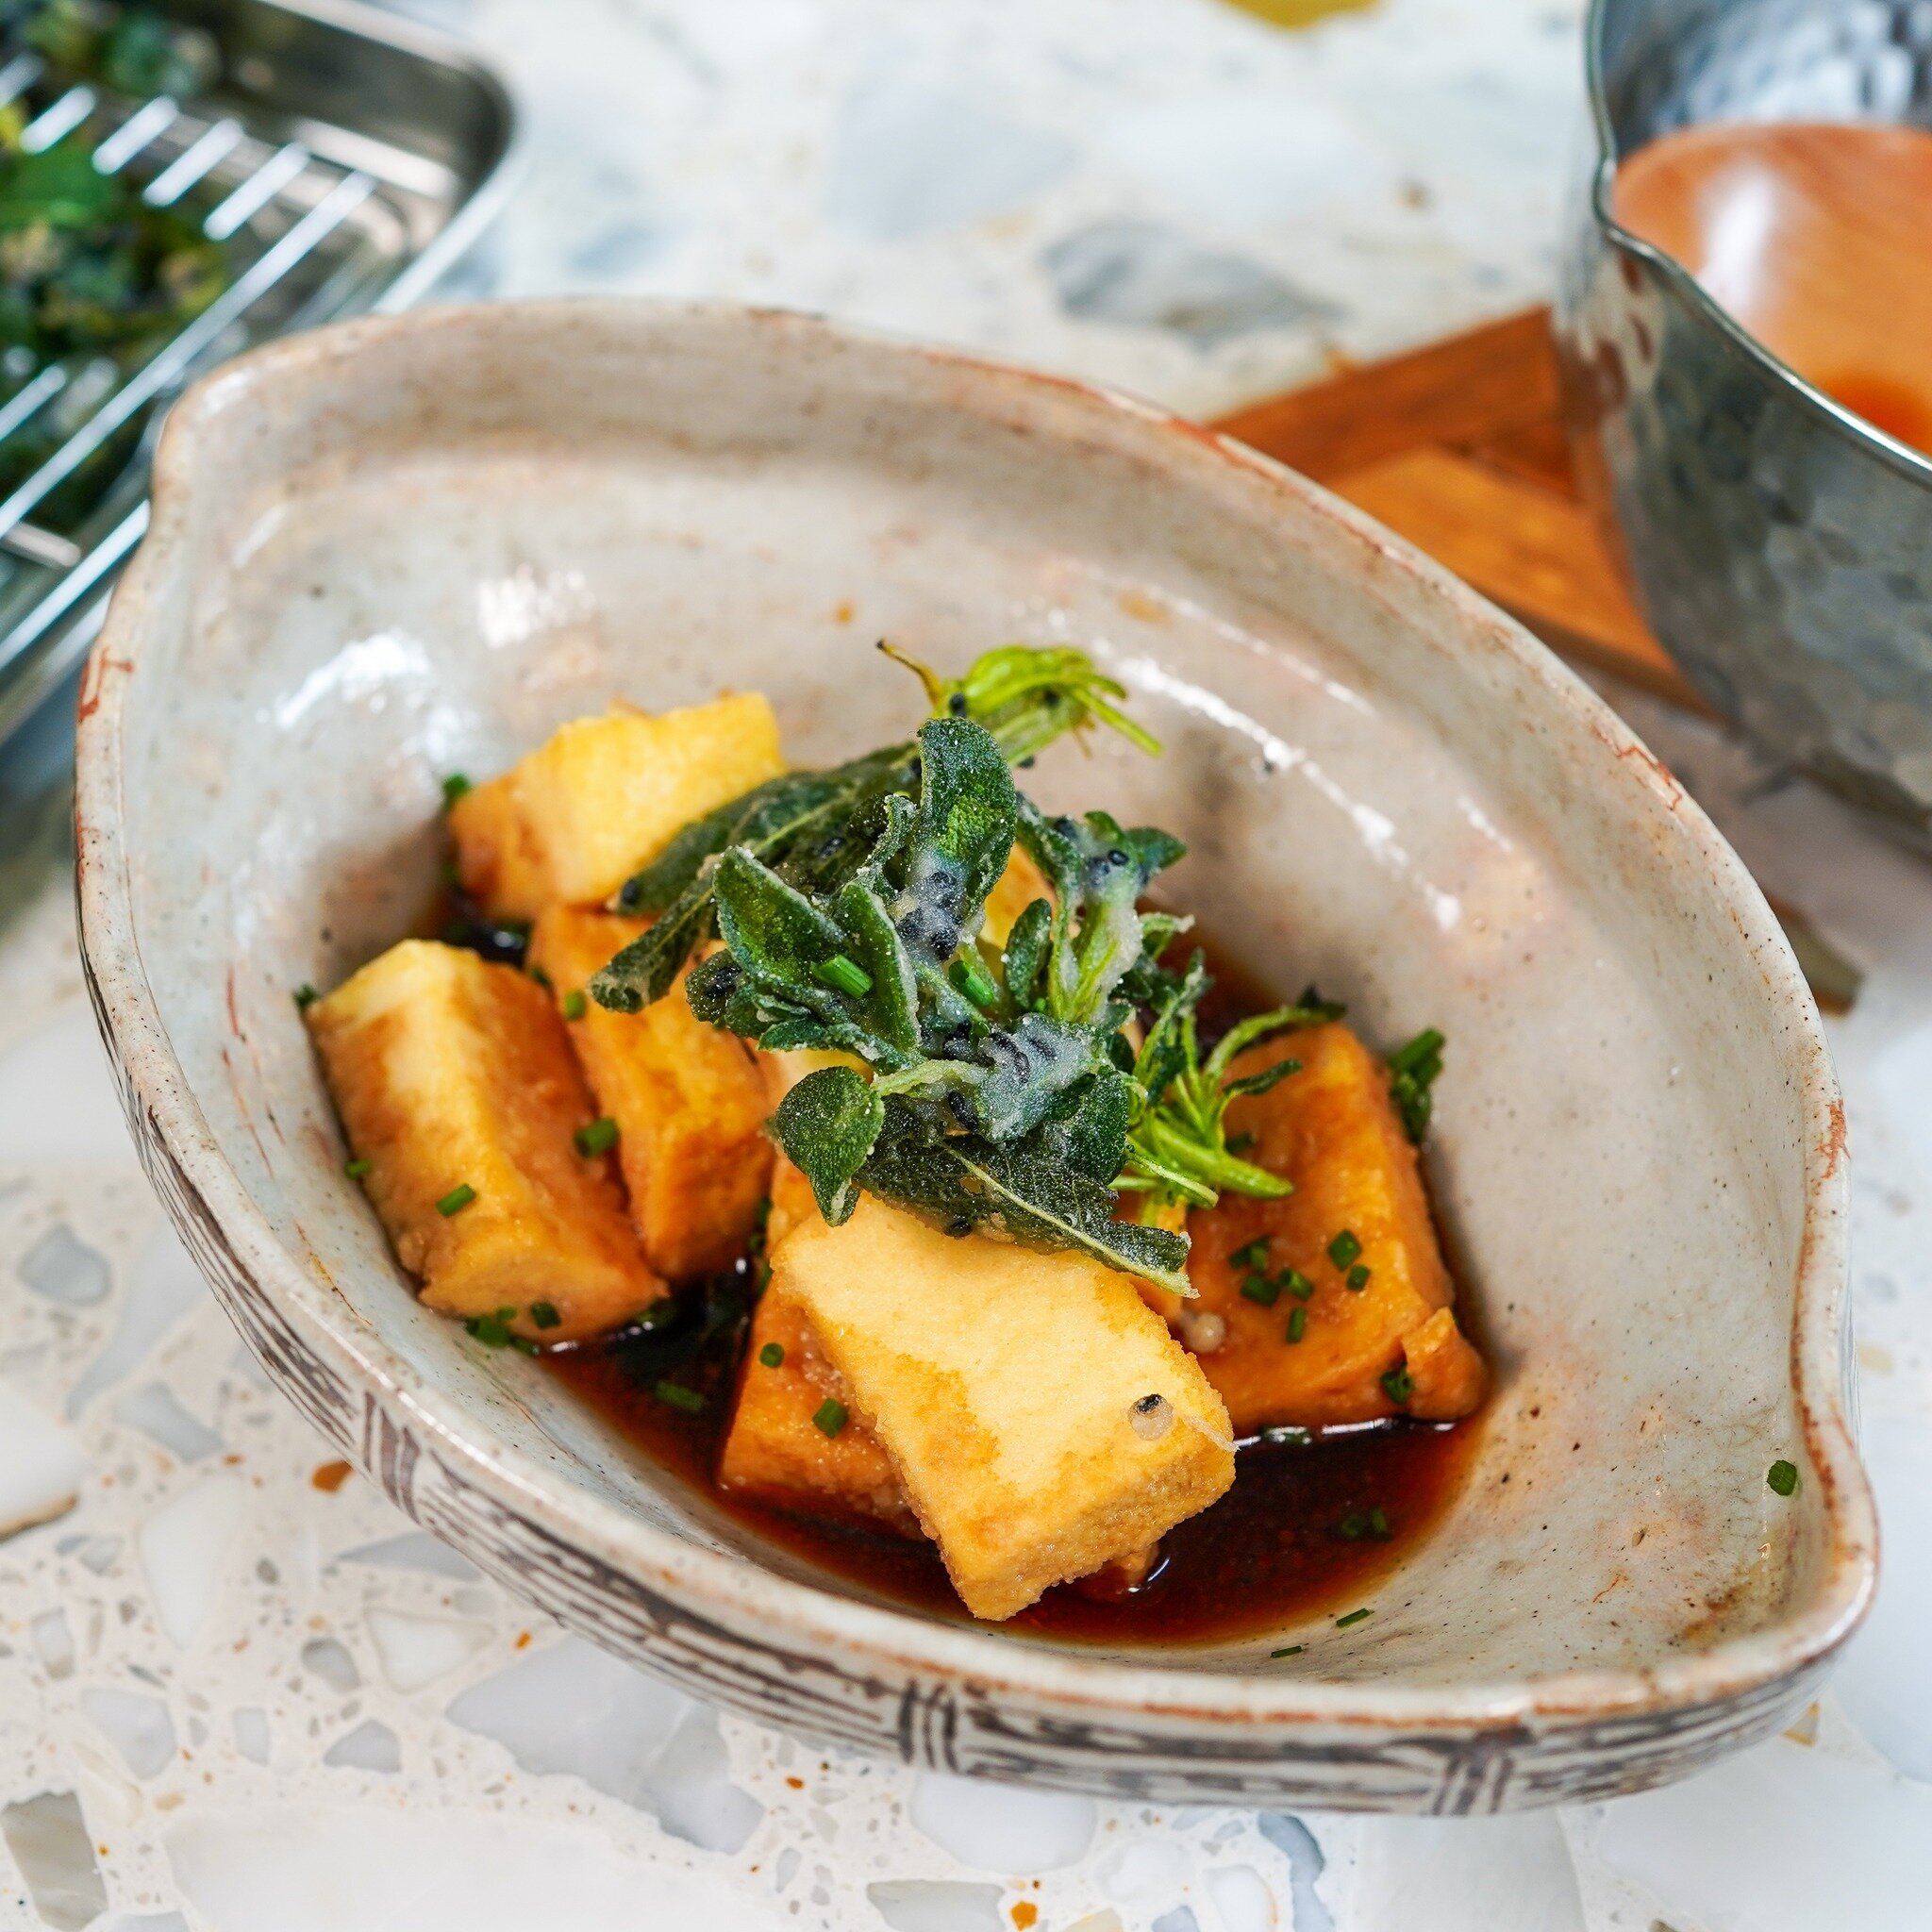 Agedashi Tofu with Fried Sage Recipe

A classic Japanese dish, with my own sage leaf twist!

A dish to make this Easter as a tasty side, with that miso lamb perhaps?

The sauce is based on a katsuo dashi, check out my earlier reel, showing how to mak